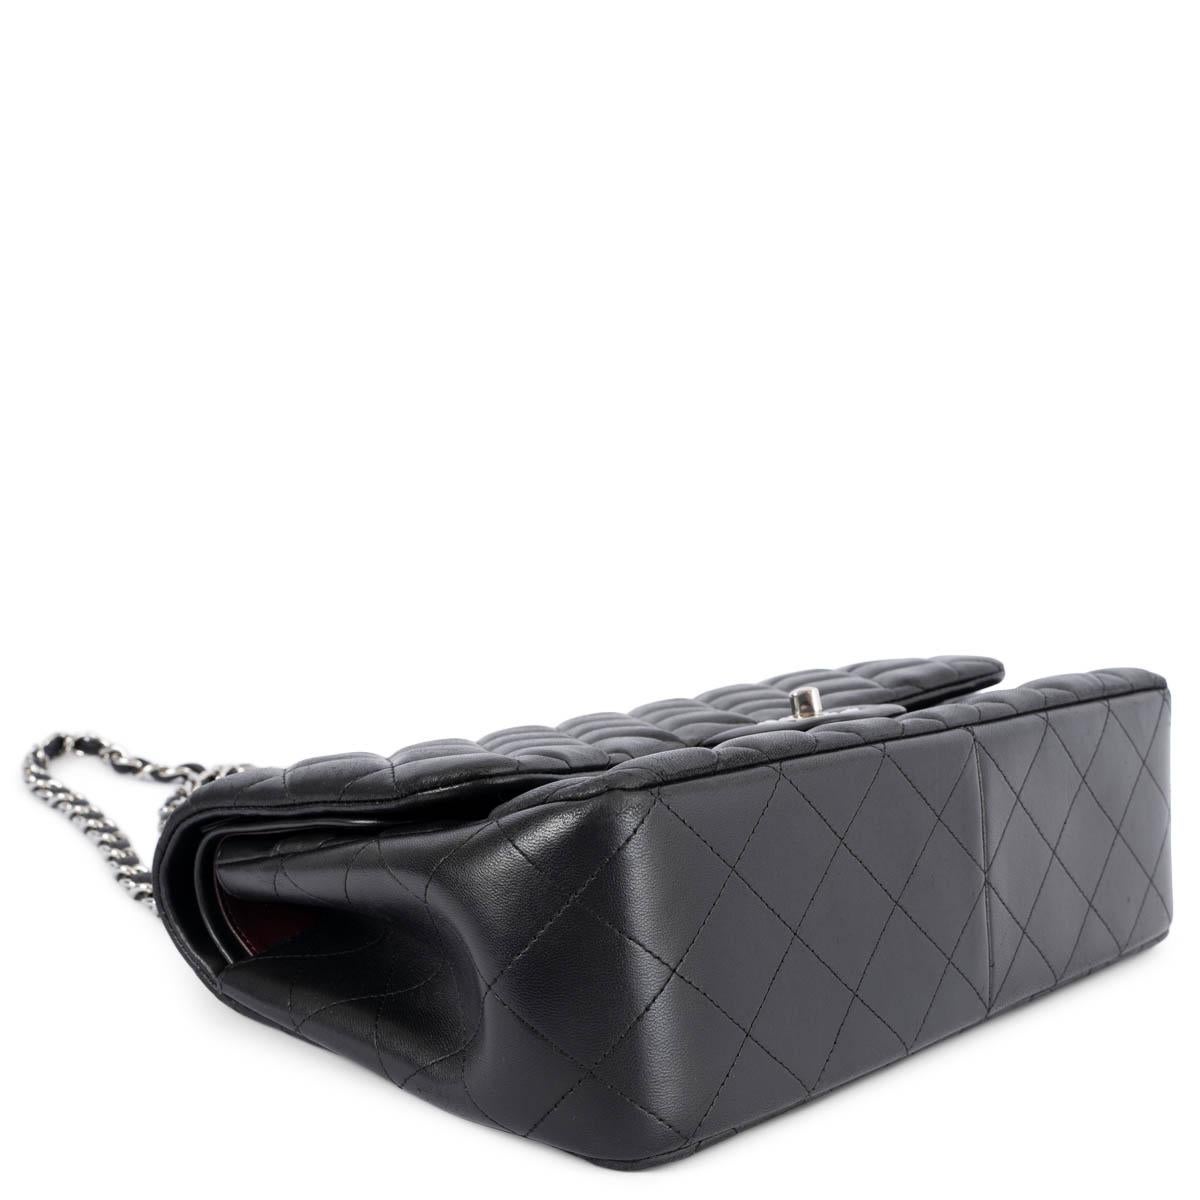 Women's CHANEL black quilted lambskin leather TIMELESS CLASSIC LARGE Flap Shoulder Bag For Sale